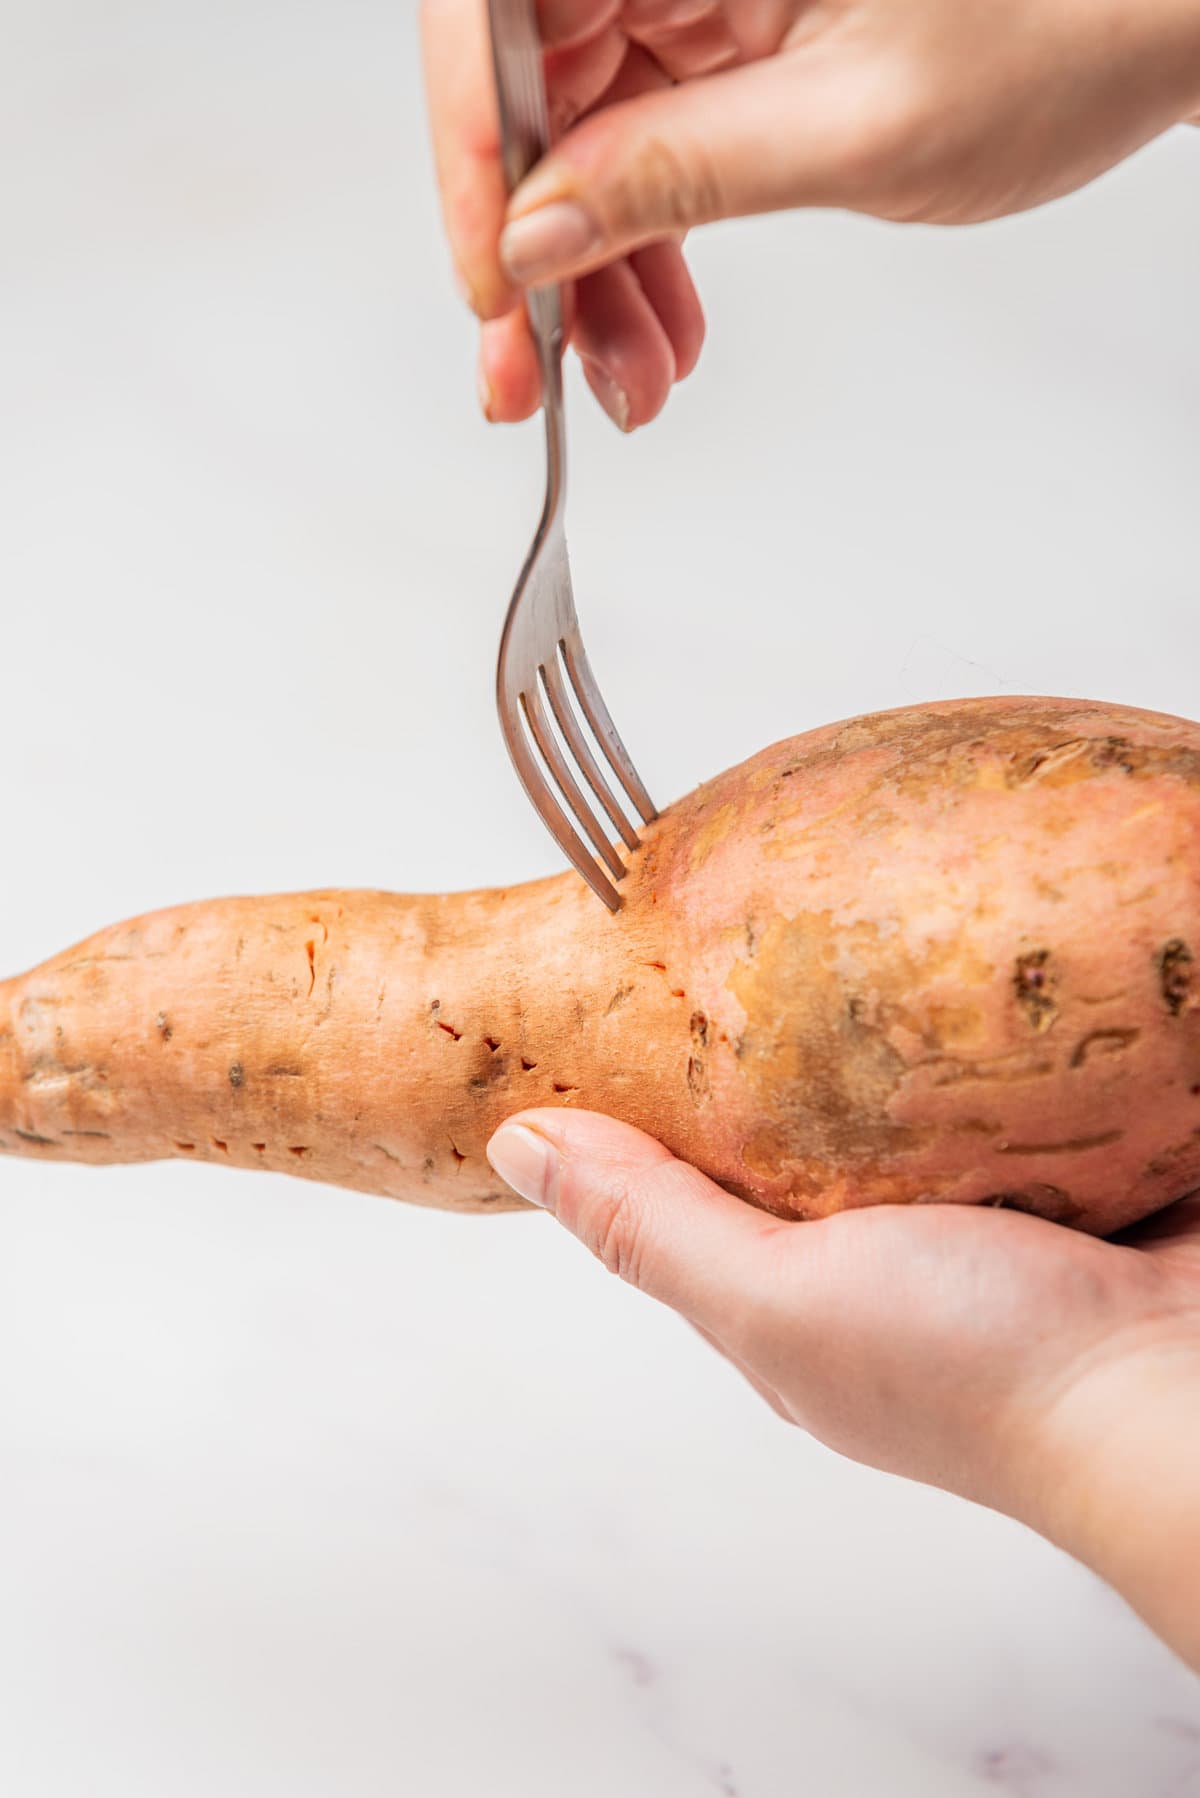 An image of a hand holding a sweet potato while being pierced by a fork.